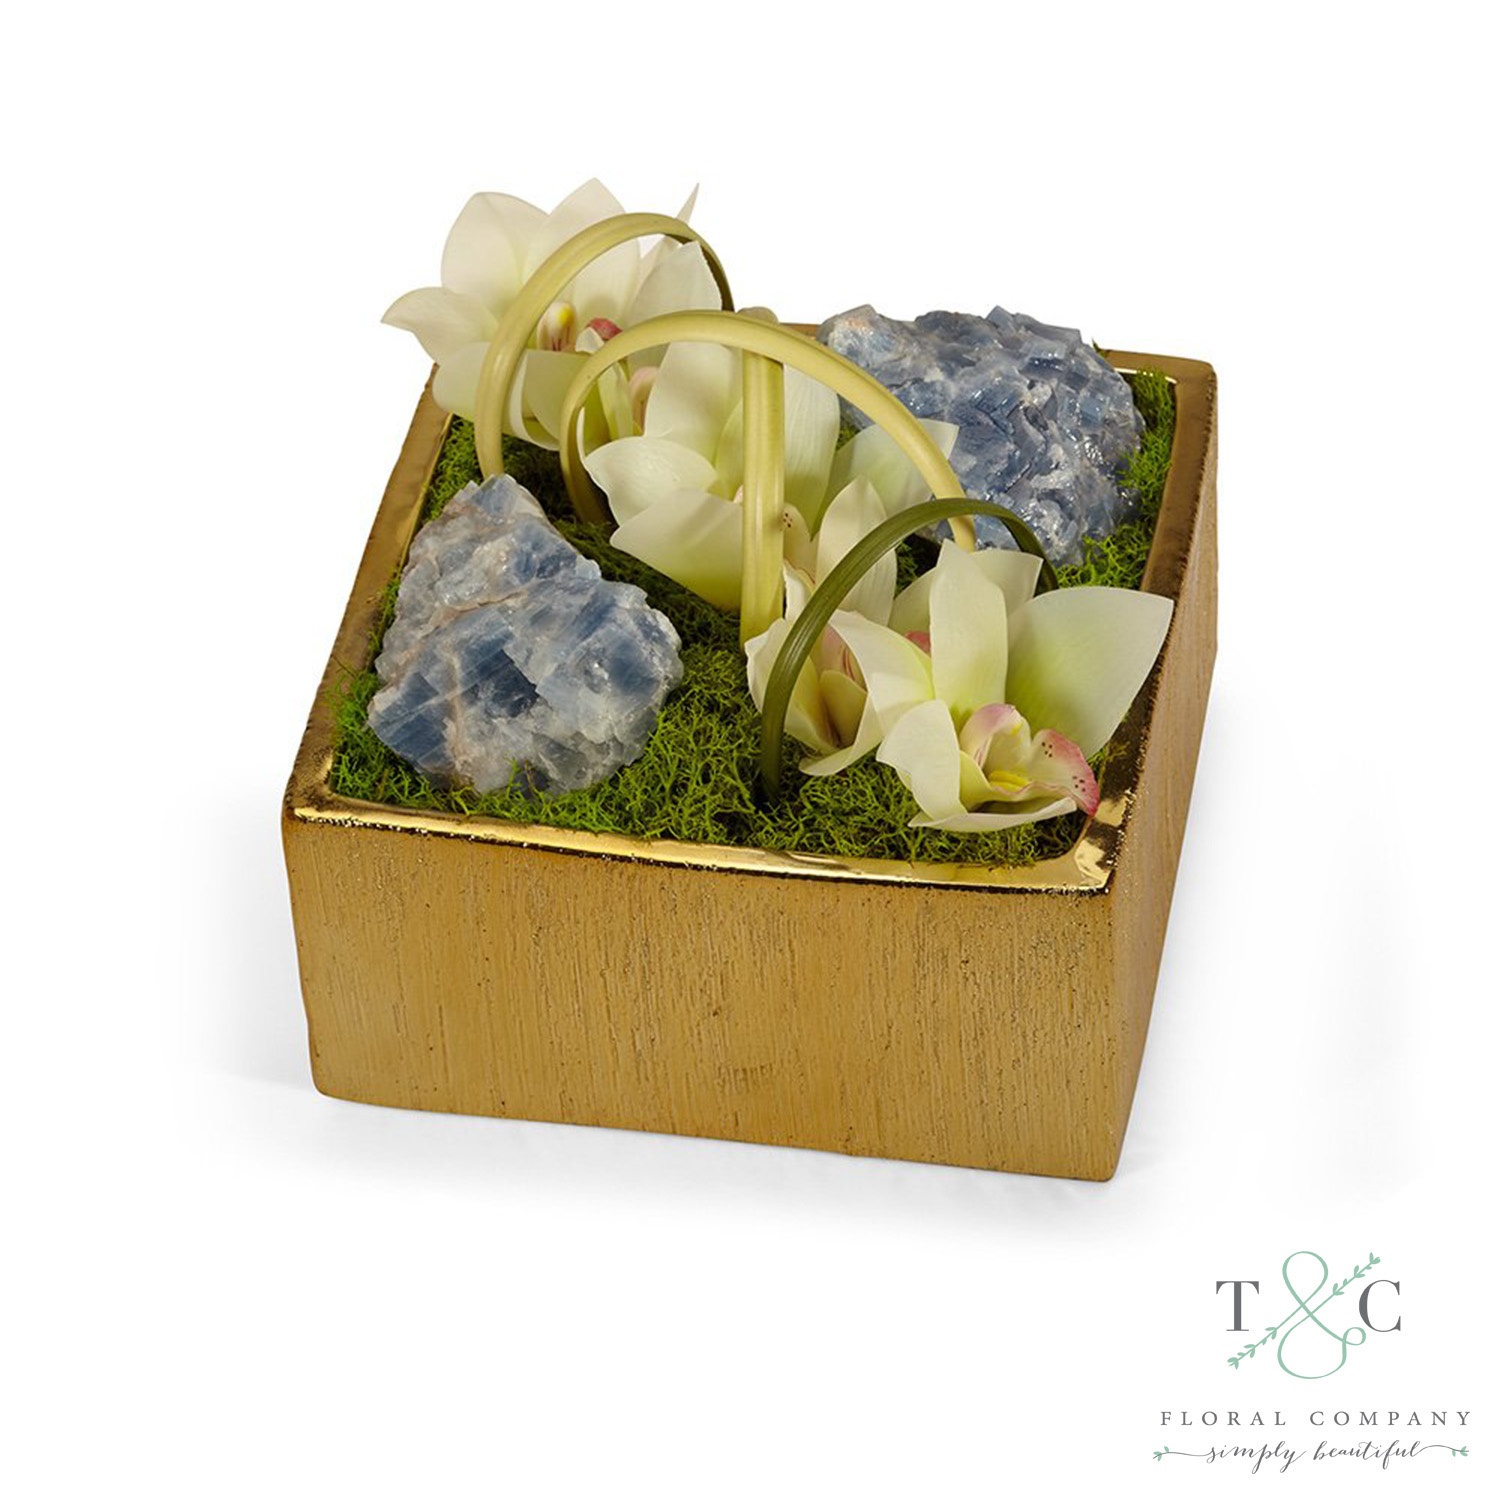 White Orchid with Blue Calcite Table Top in Gold Square - 8L x 8W x 8H Floral Arrangement